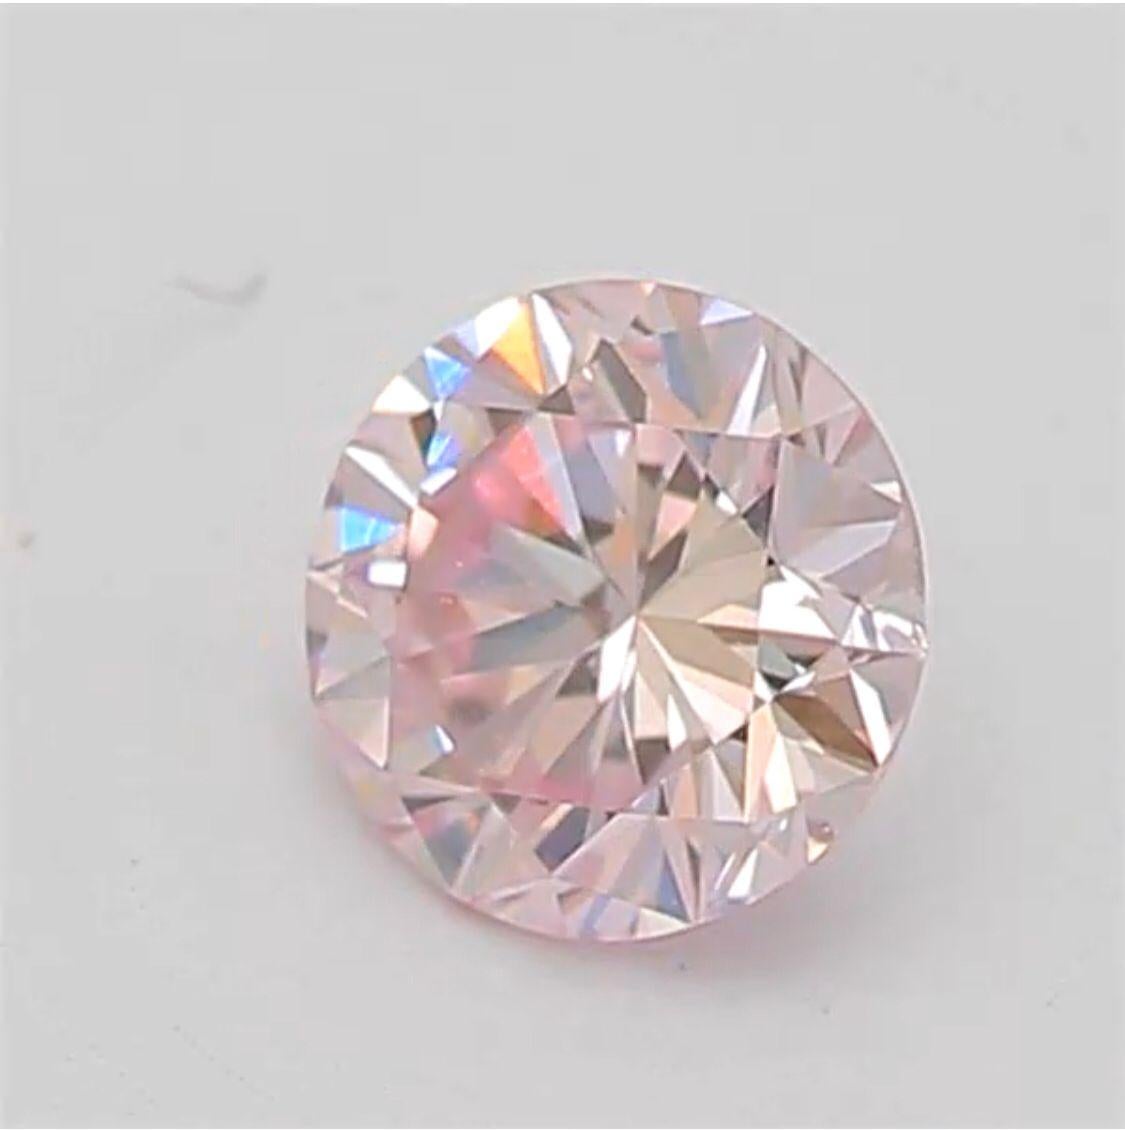 0.20 Carat Very Light Pink Round Shaped Diamond VS1 Clarity CGL Certified For Sale 7